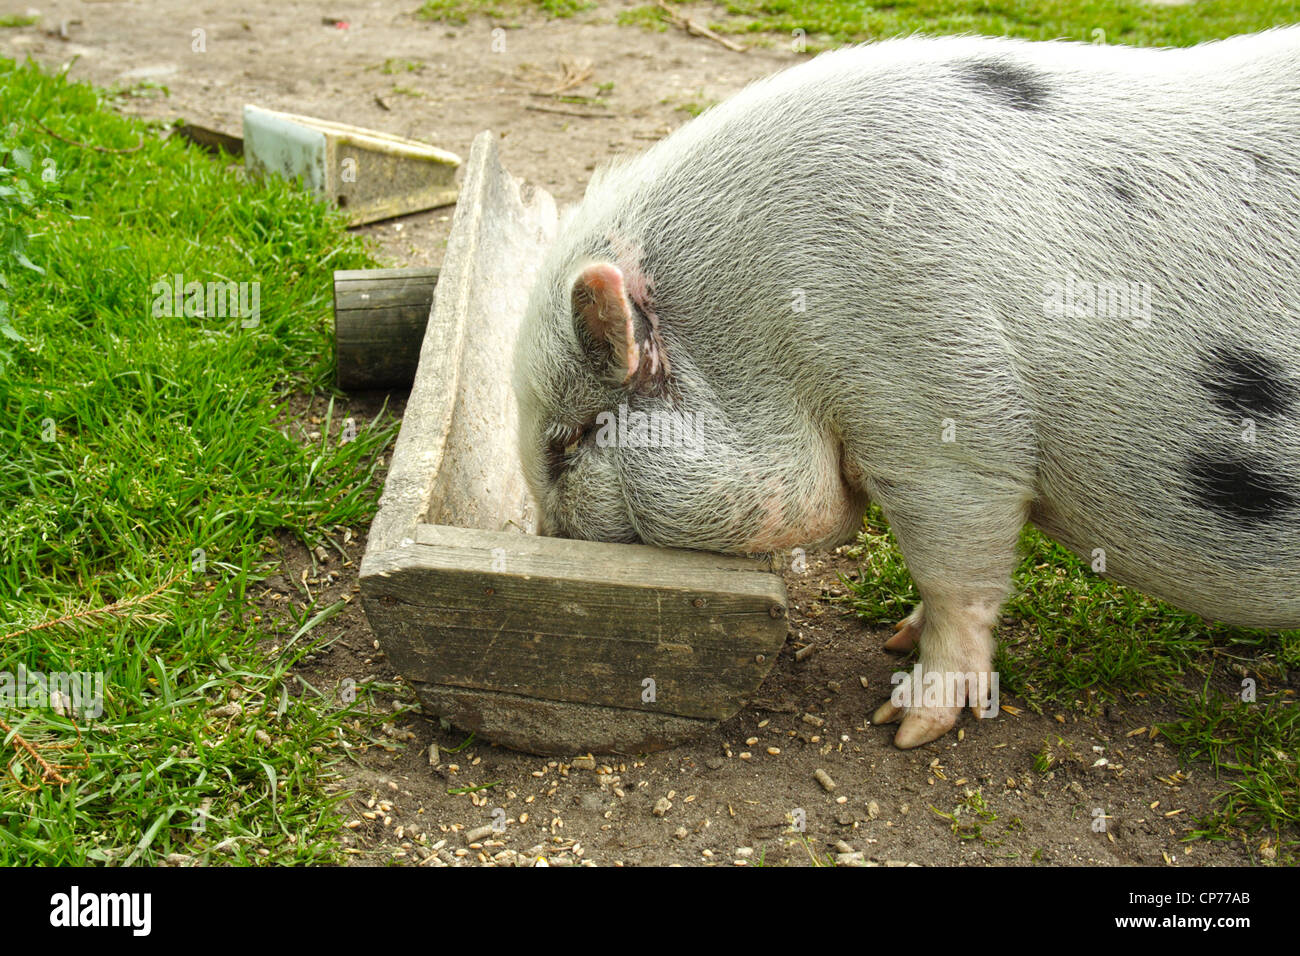 small pig eats from trough Stock Photo